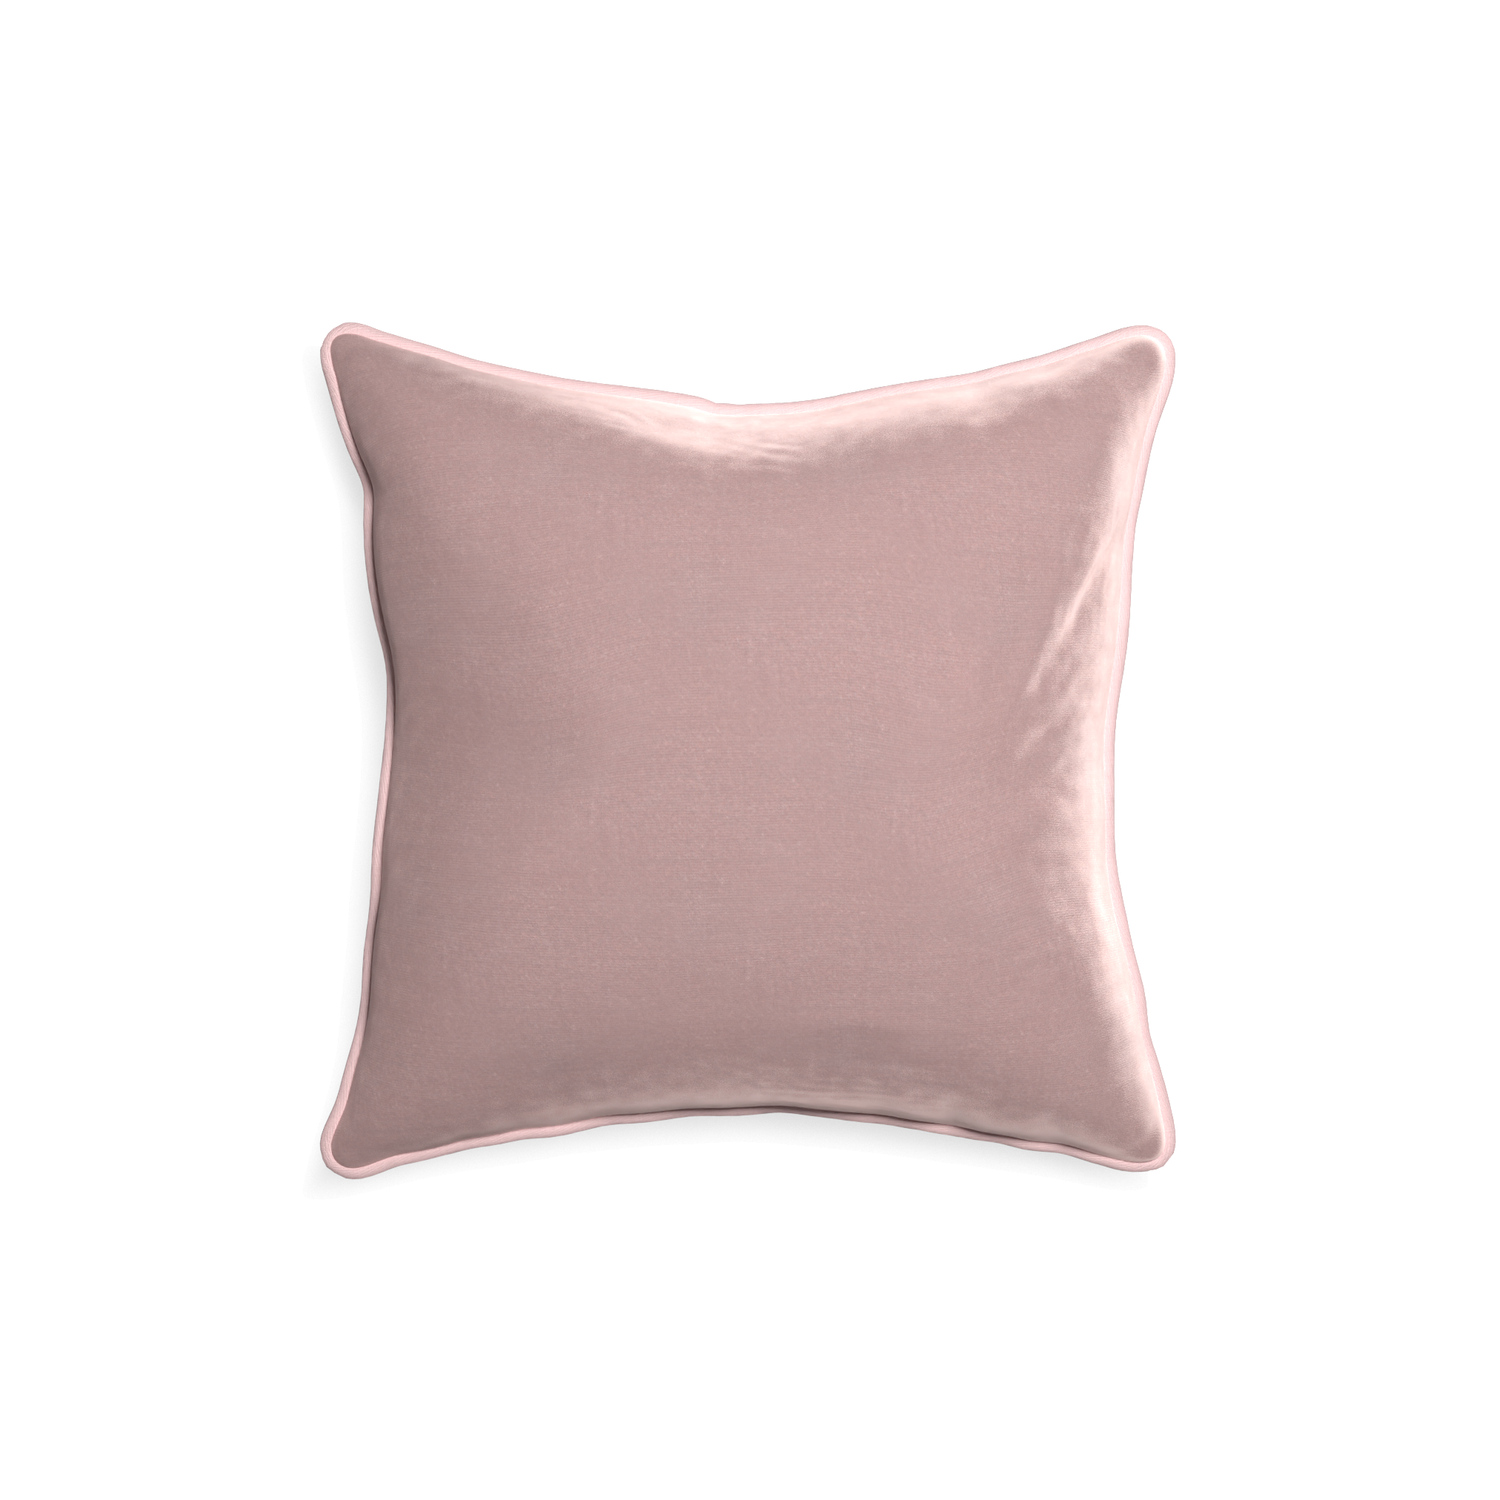 18-square mauve velvet custom pillow with petal piping on white background